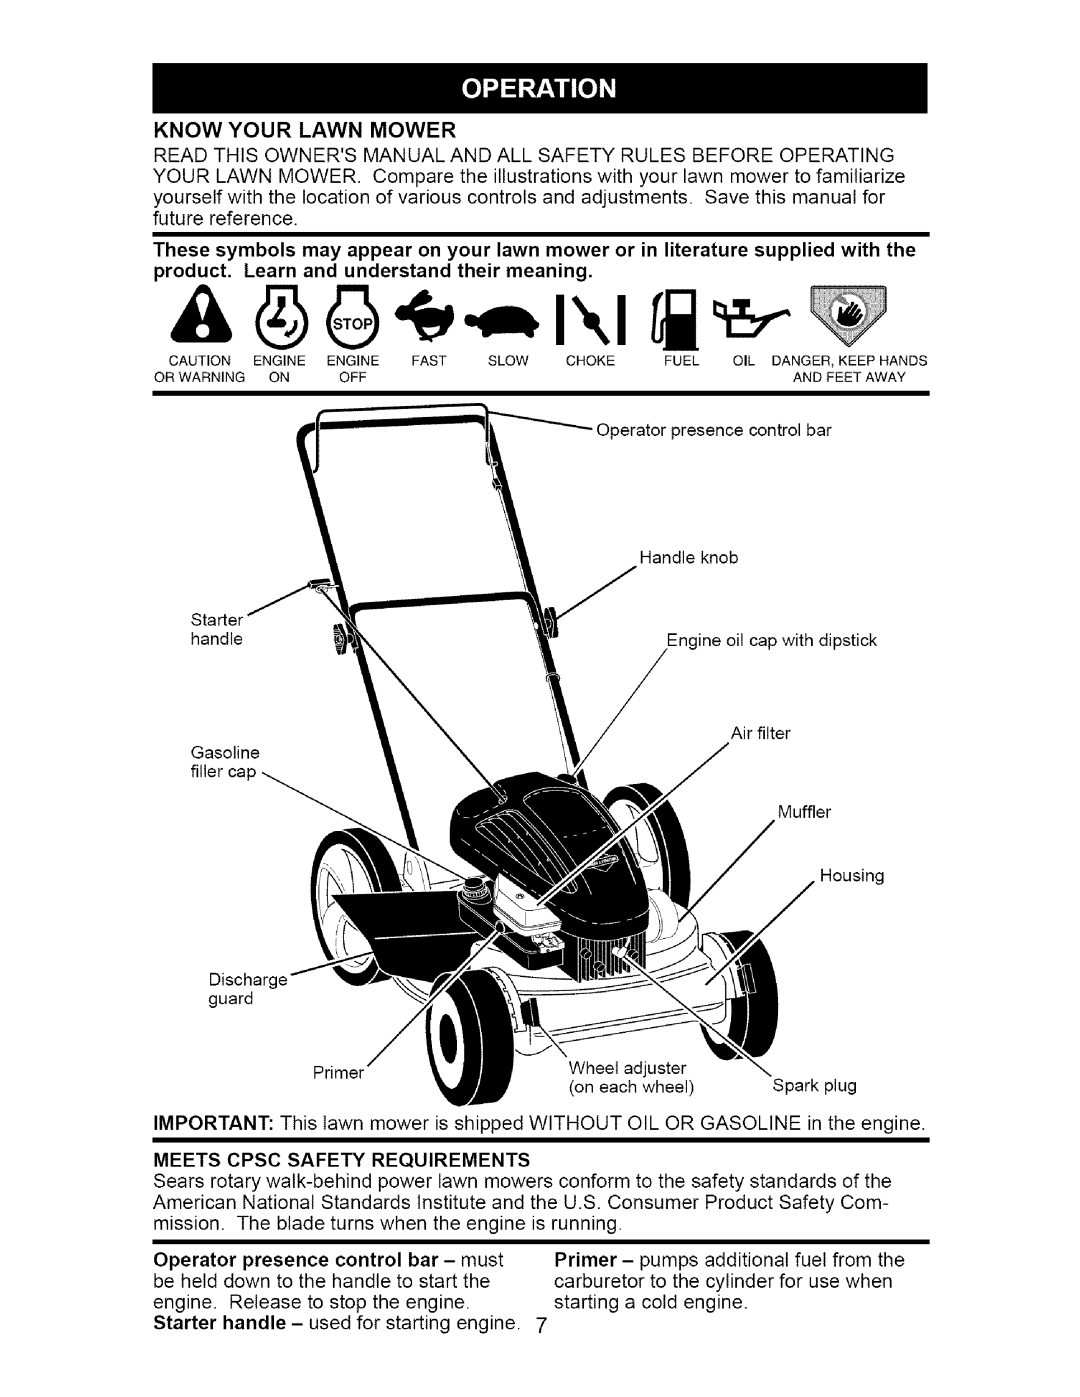 Craftsman 917.38514 Know Your Lawn Mower, product. Learn and understand their meaning, Meets Cpsc Safety Requirements 